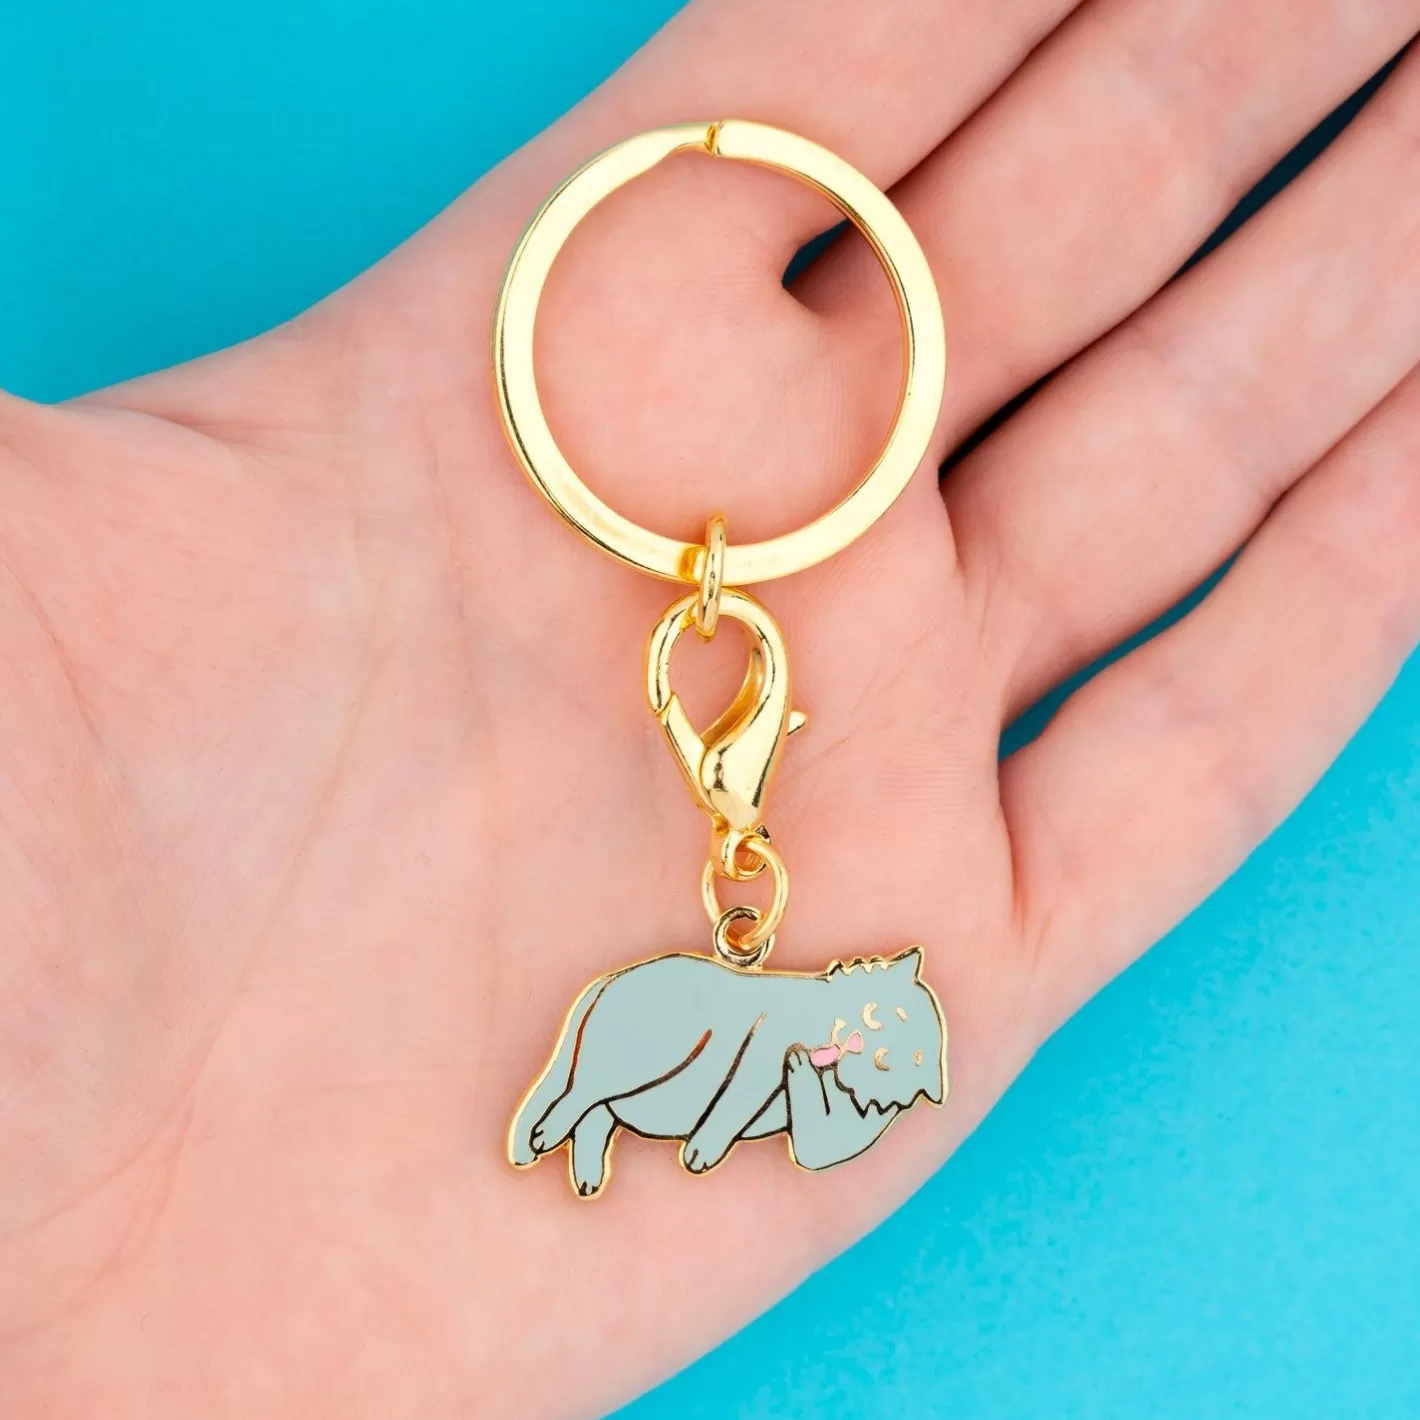 Grey Cat Key Ring / Pet Tag>Coucou Suzette New